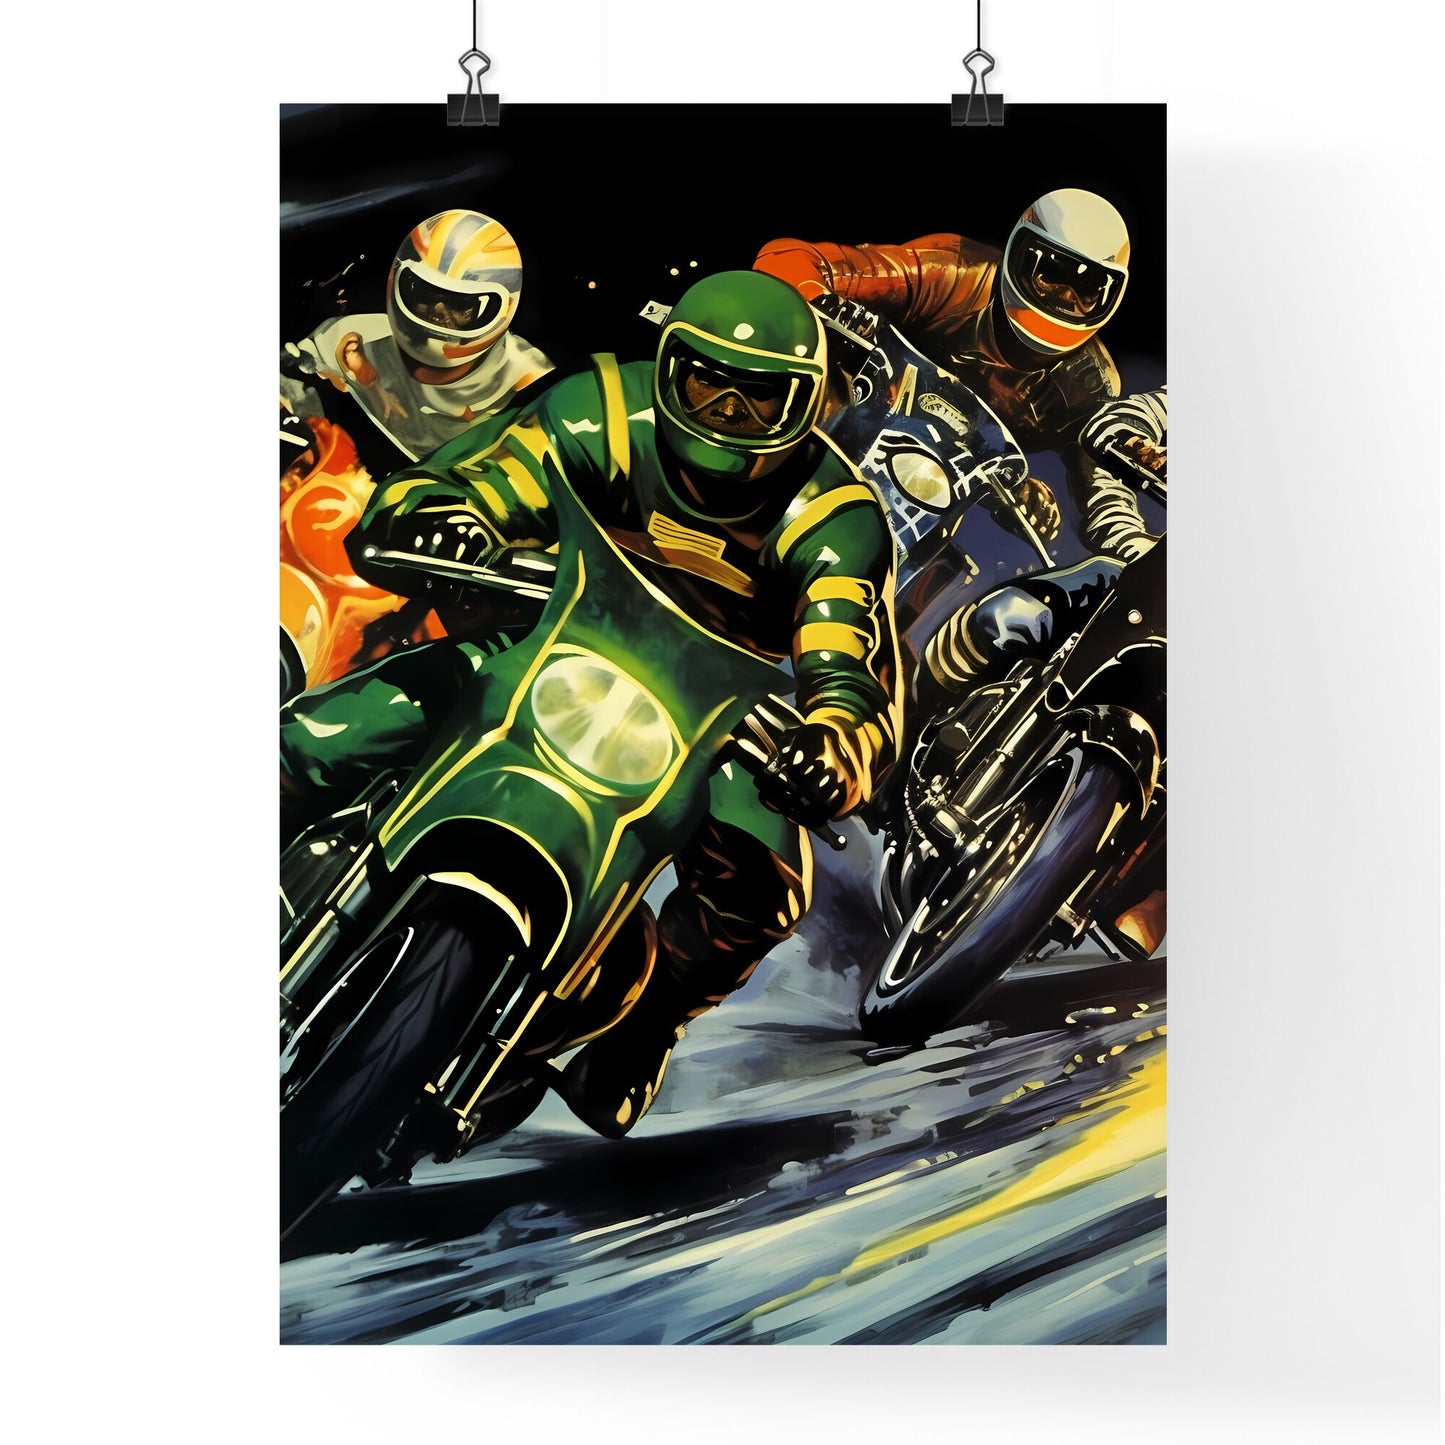 Vintage motorcycle racing poster - Art print of a group of people on motorcycles Default Title